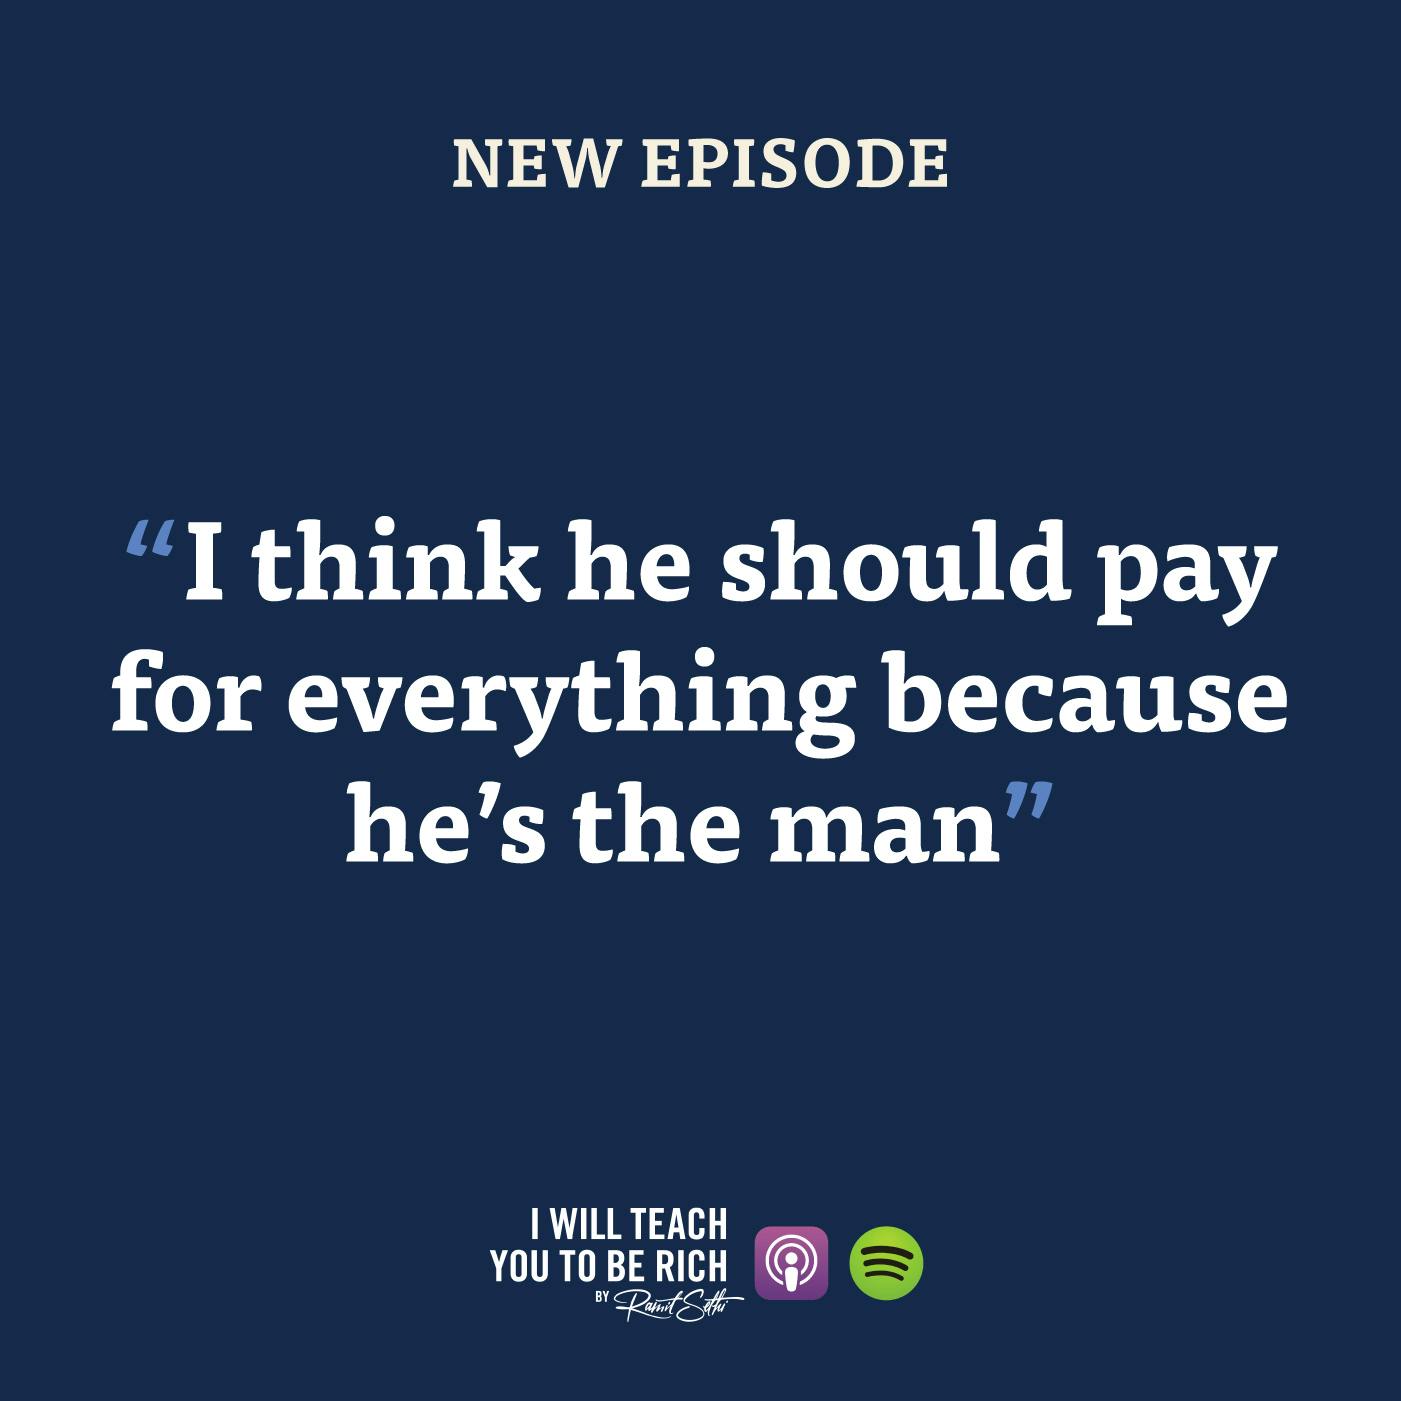 17. “I think he should pay for everything because he’s the man”